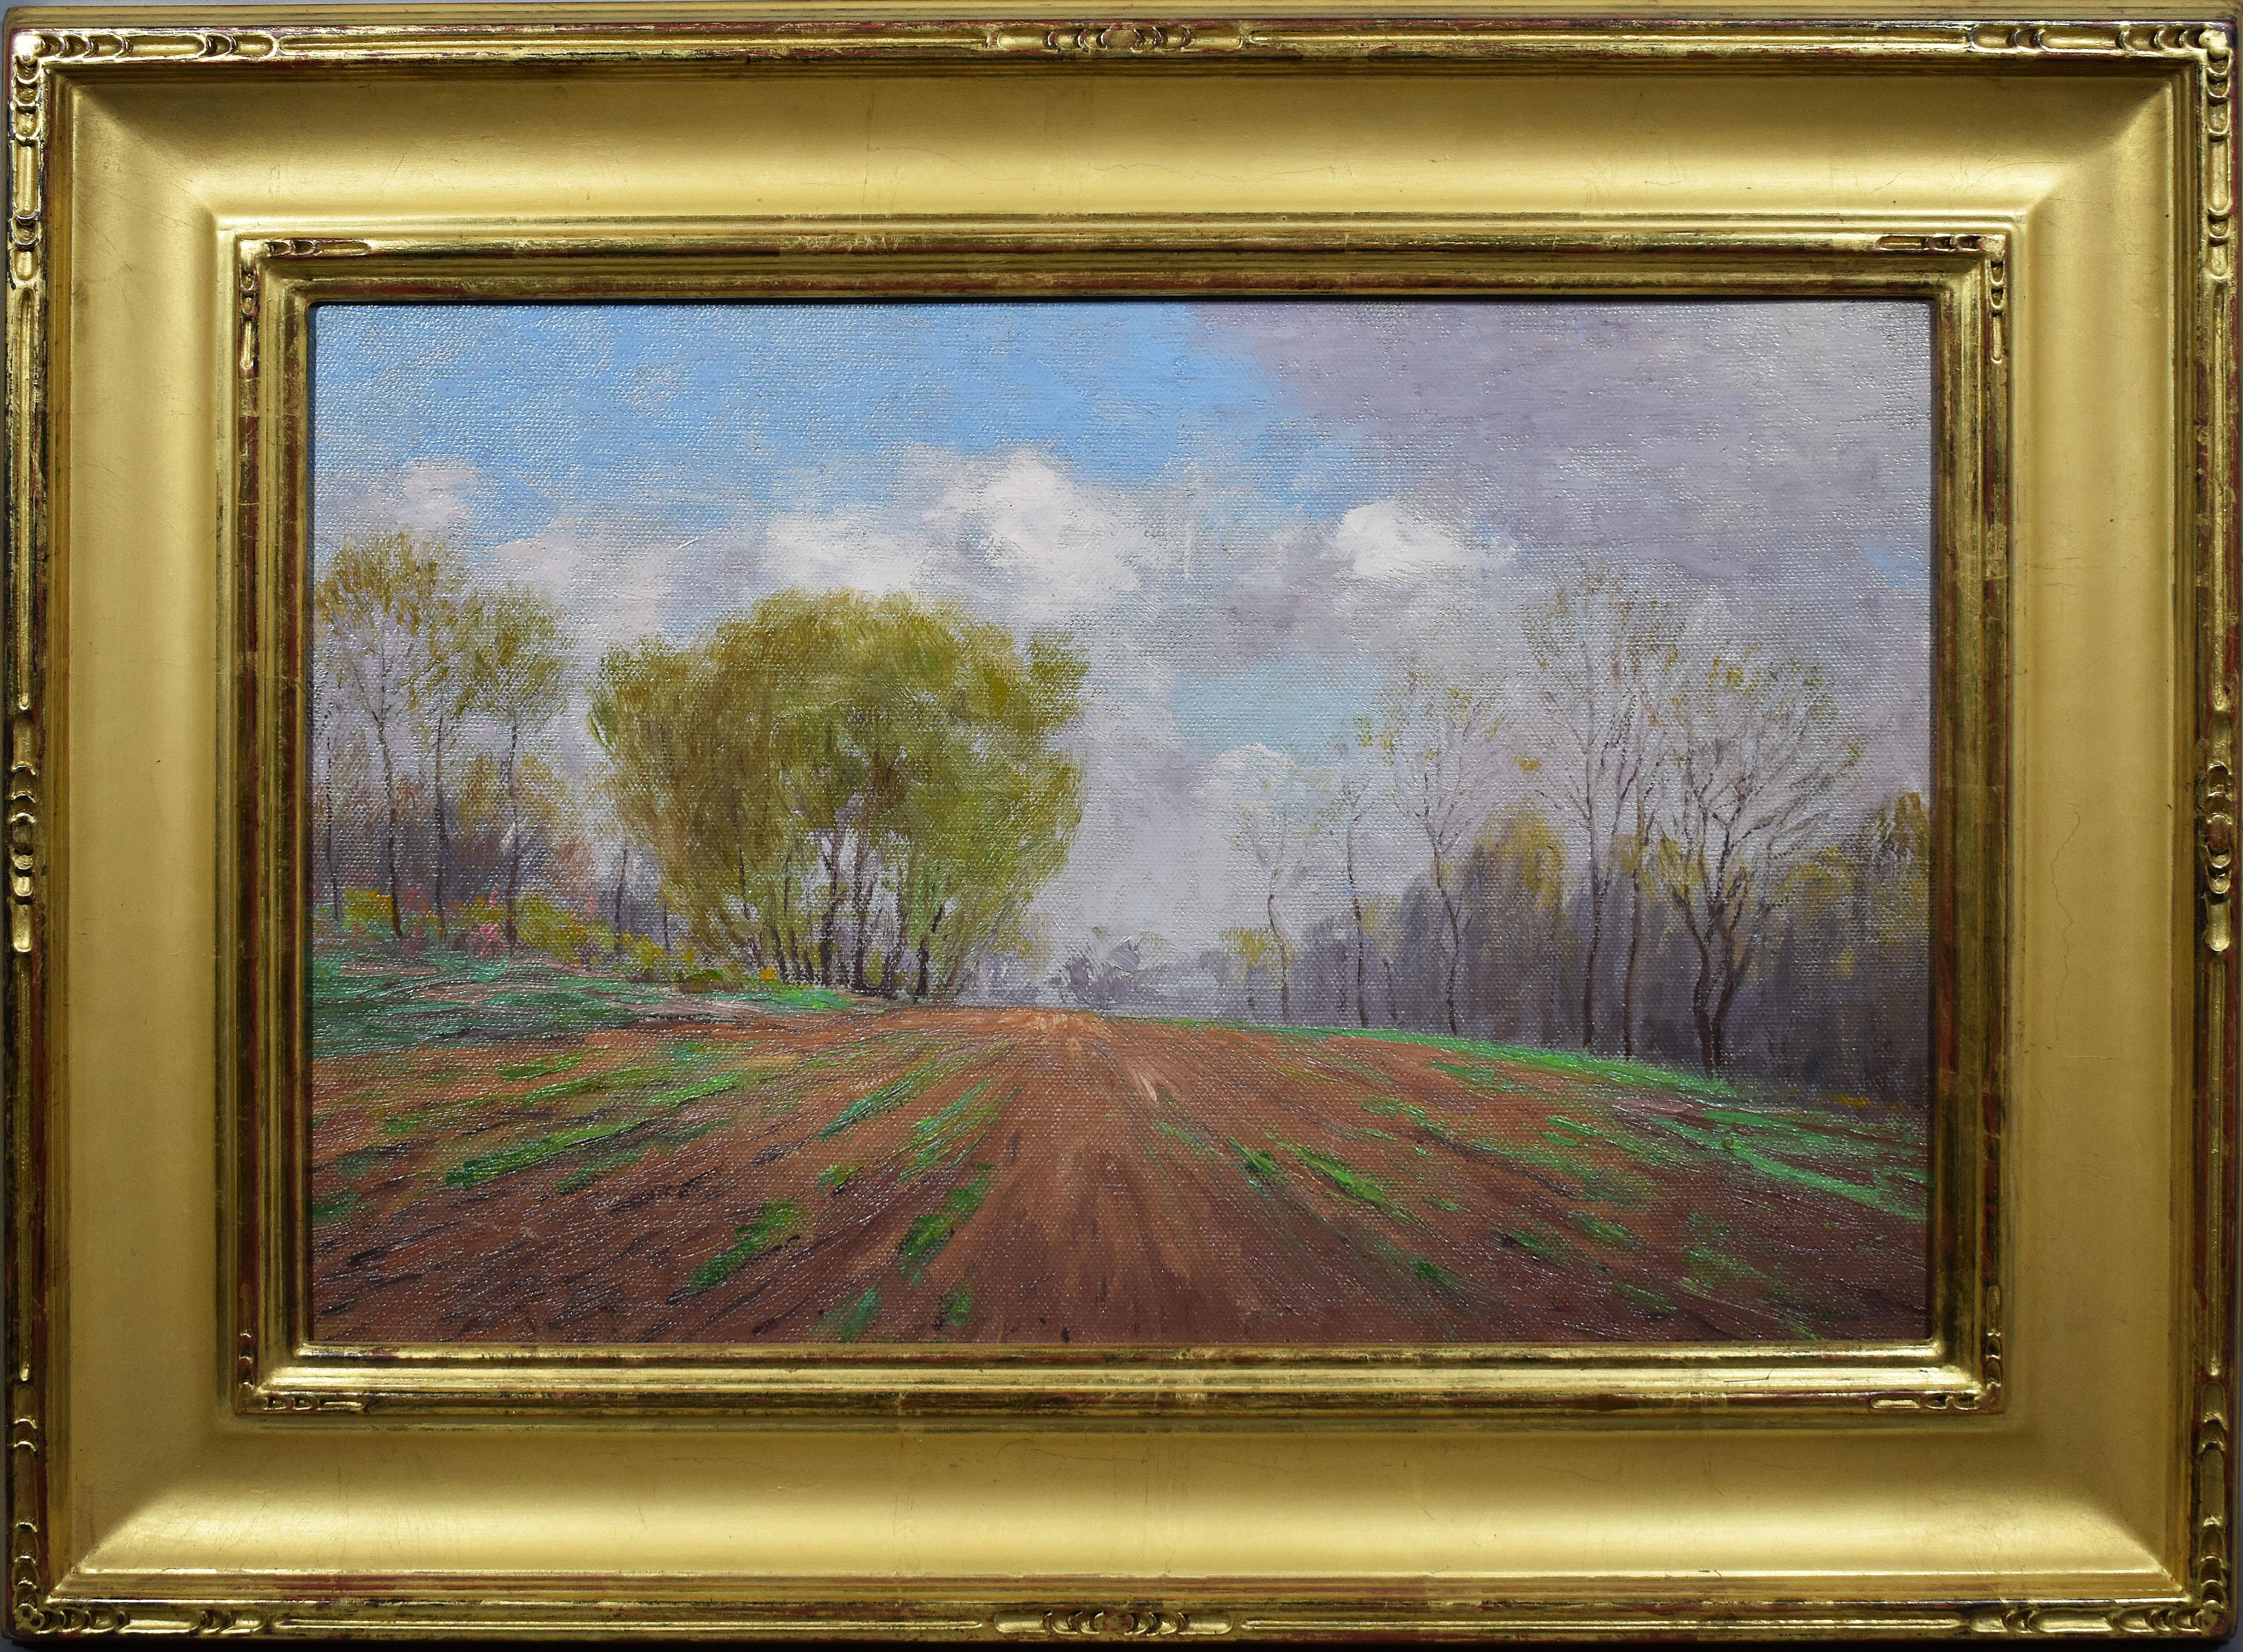 Will Hutchins Landscape Painting - Antique American Impressionist Wild Flower Panoramic Landscape Fall Oil Painting